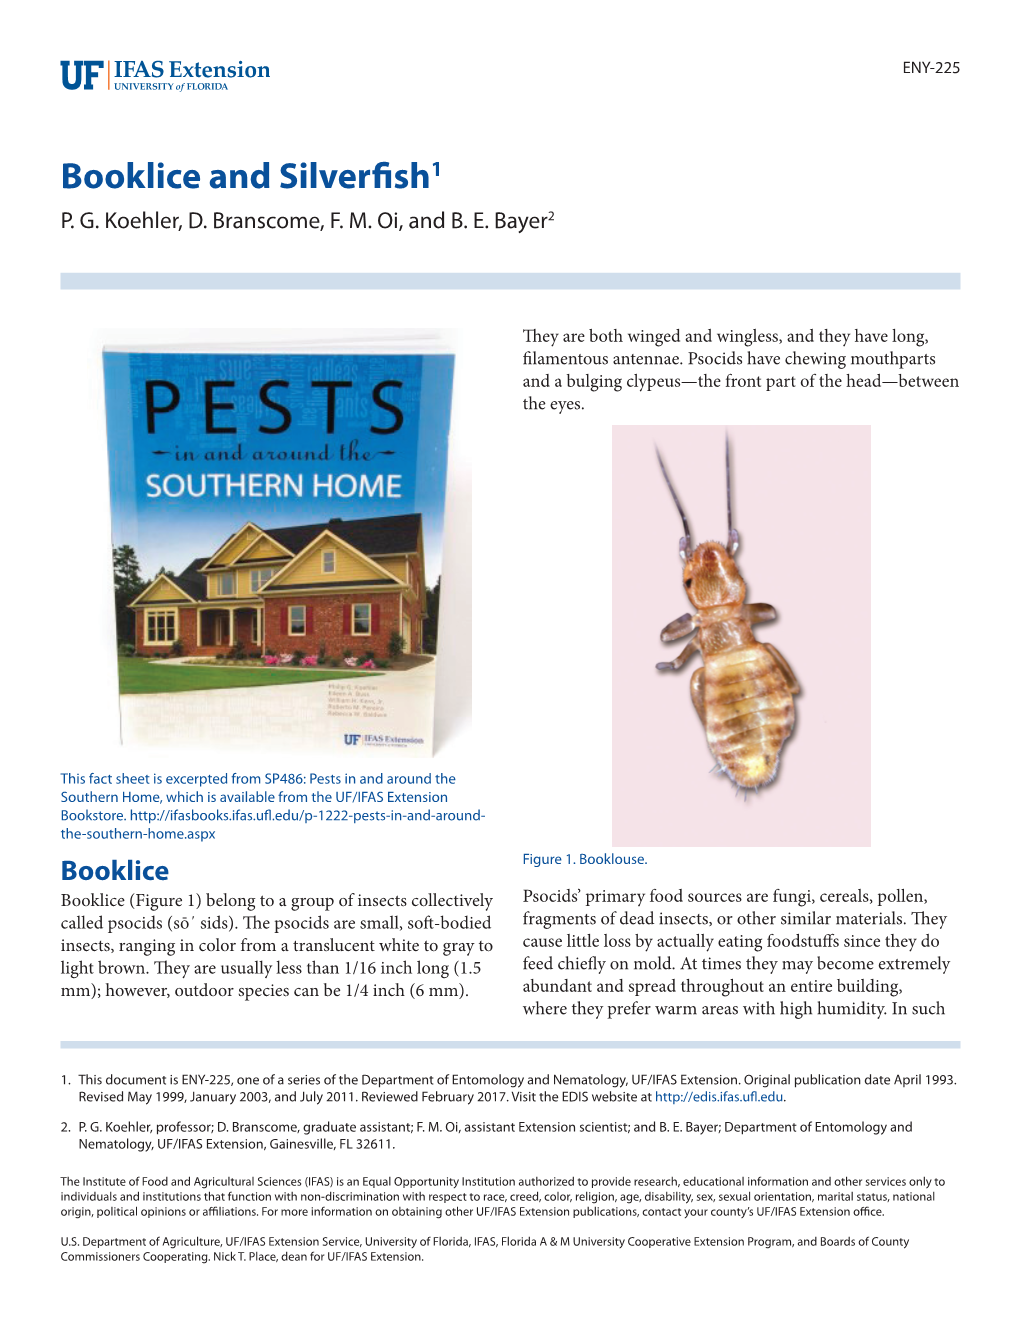 Booklice and Silverfish1 P